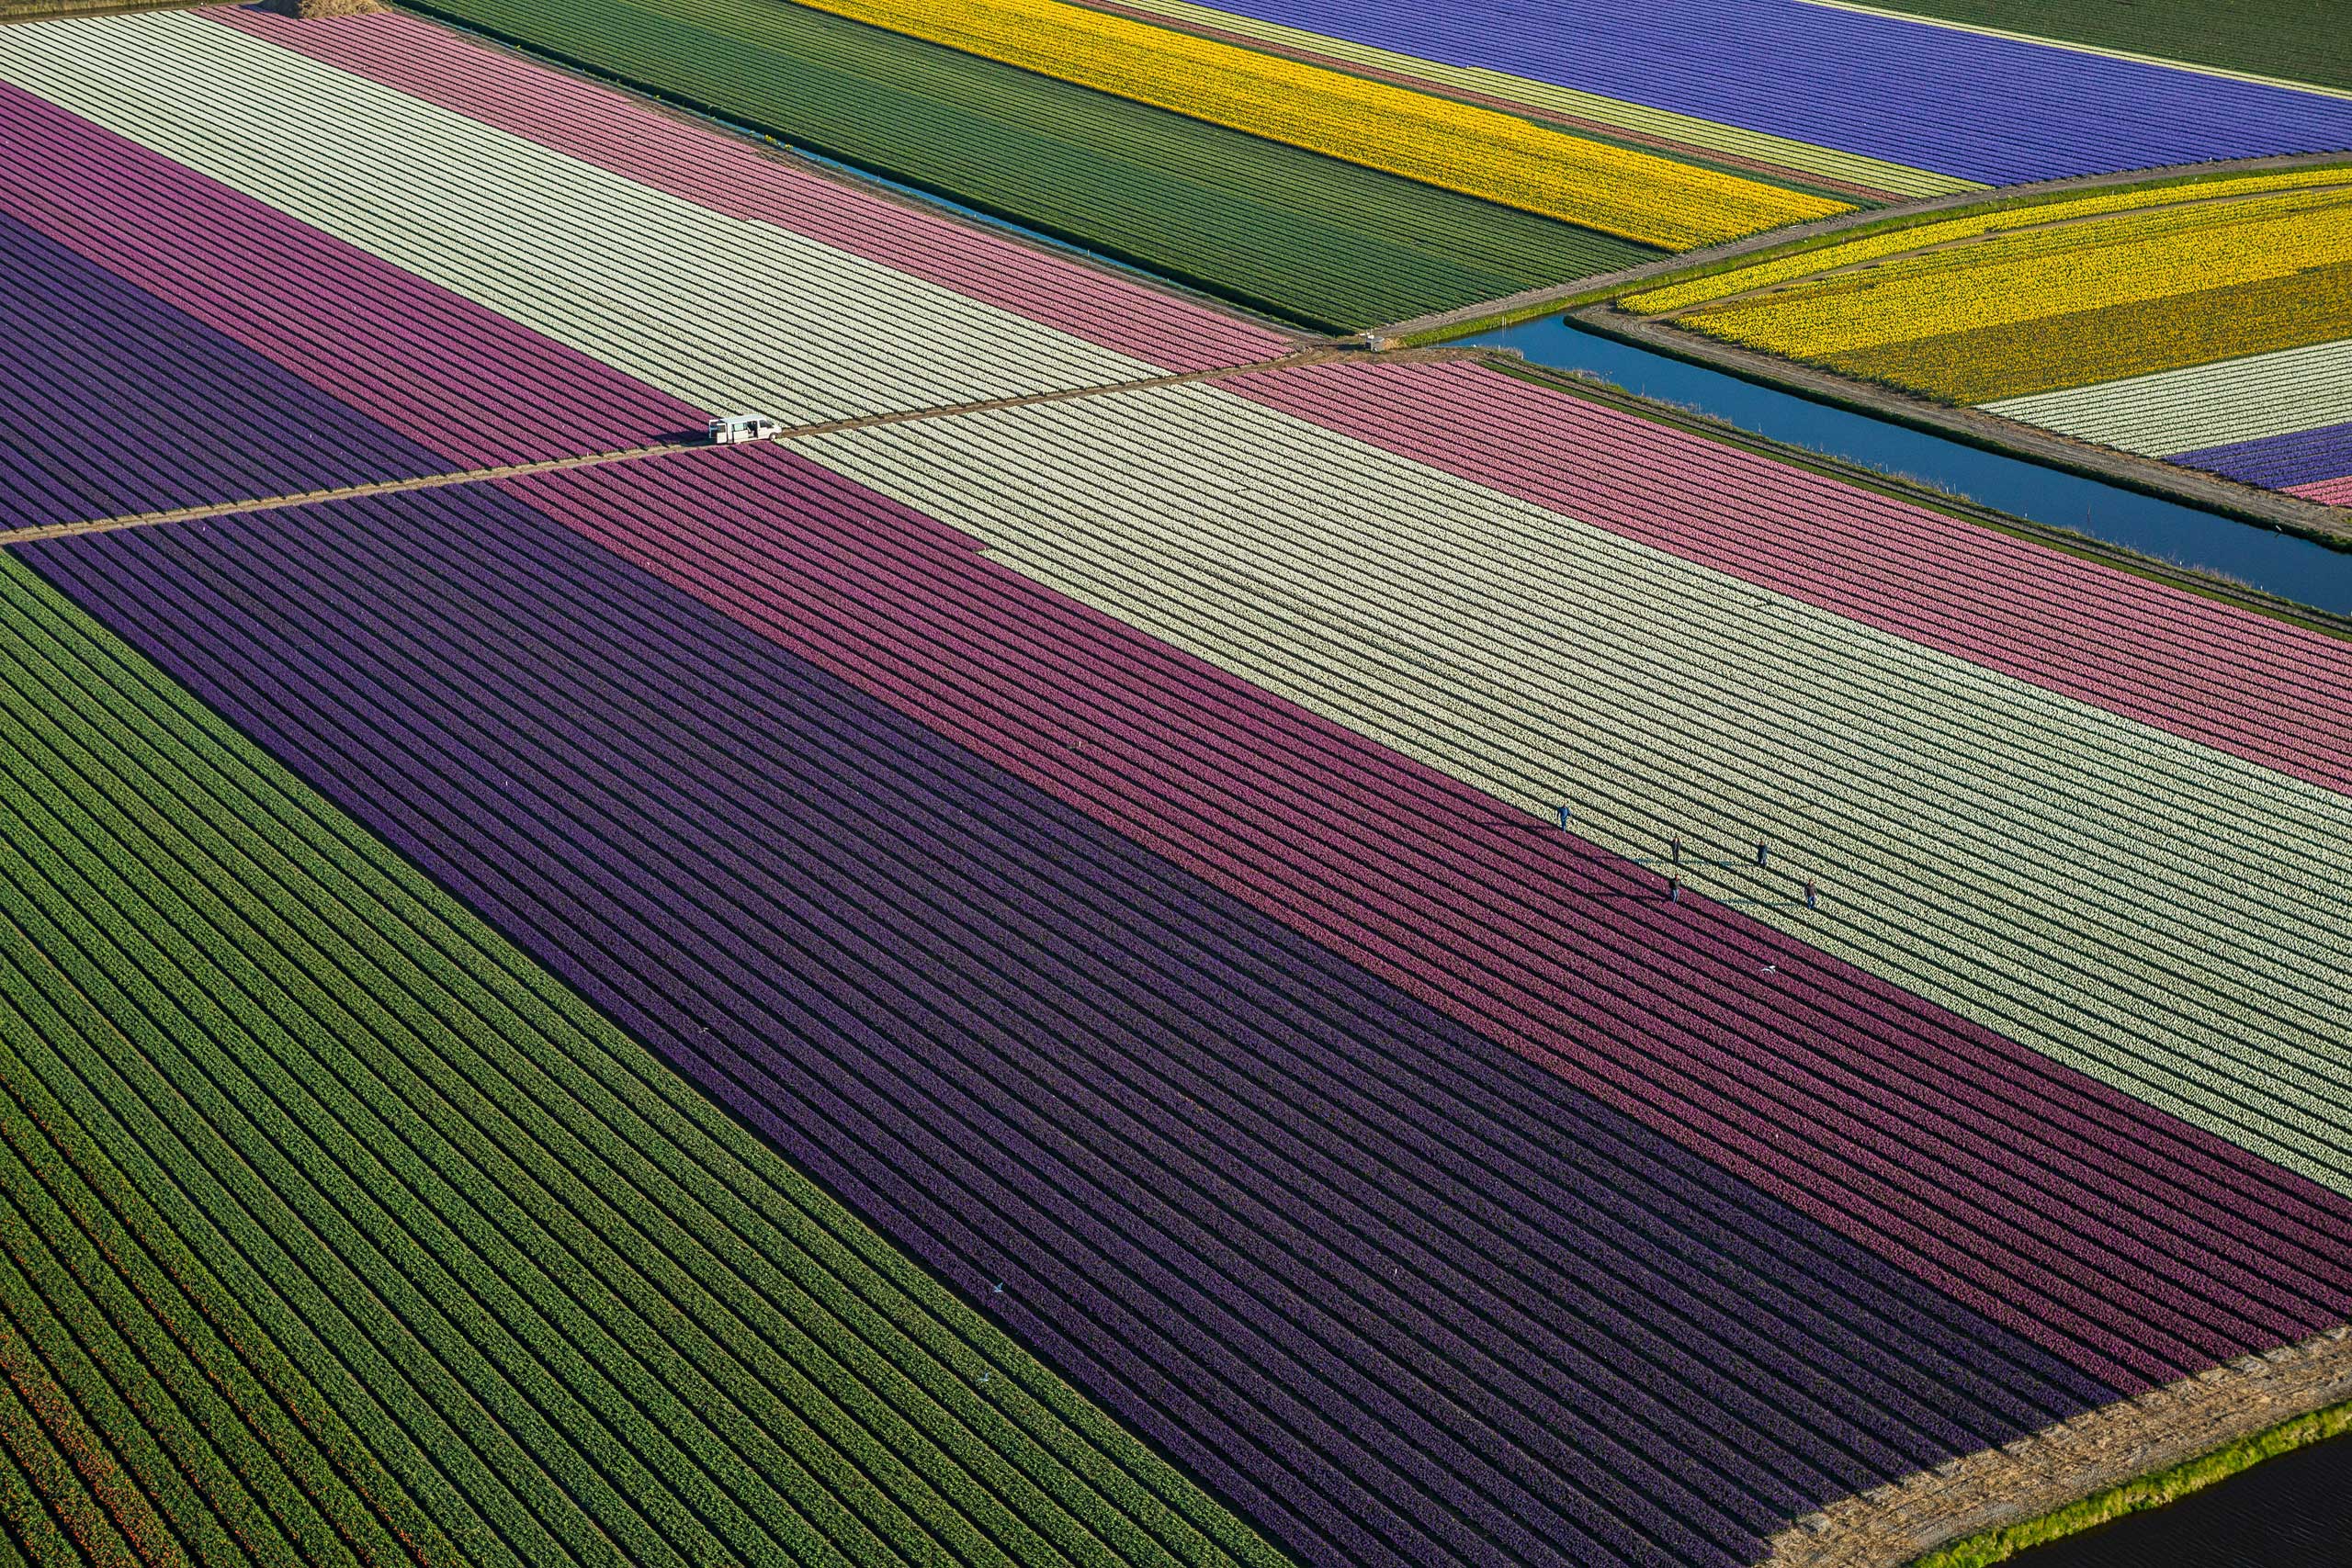 Tulips blooming in fields between Amsterdam and Leiden, the Netherlands.